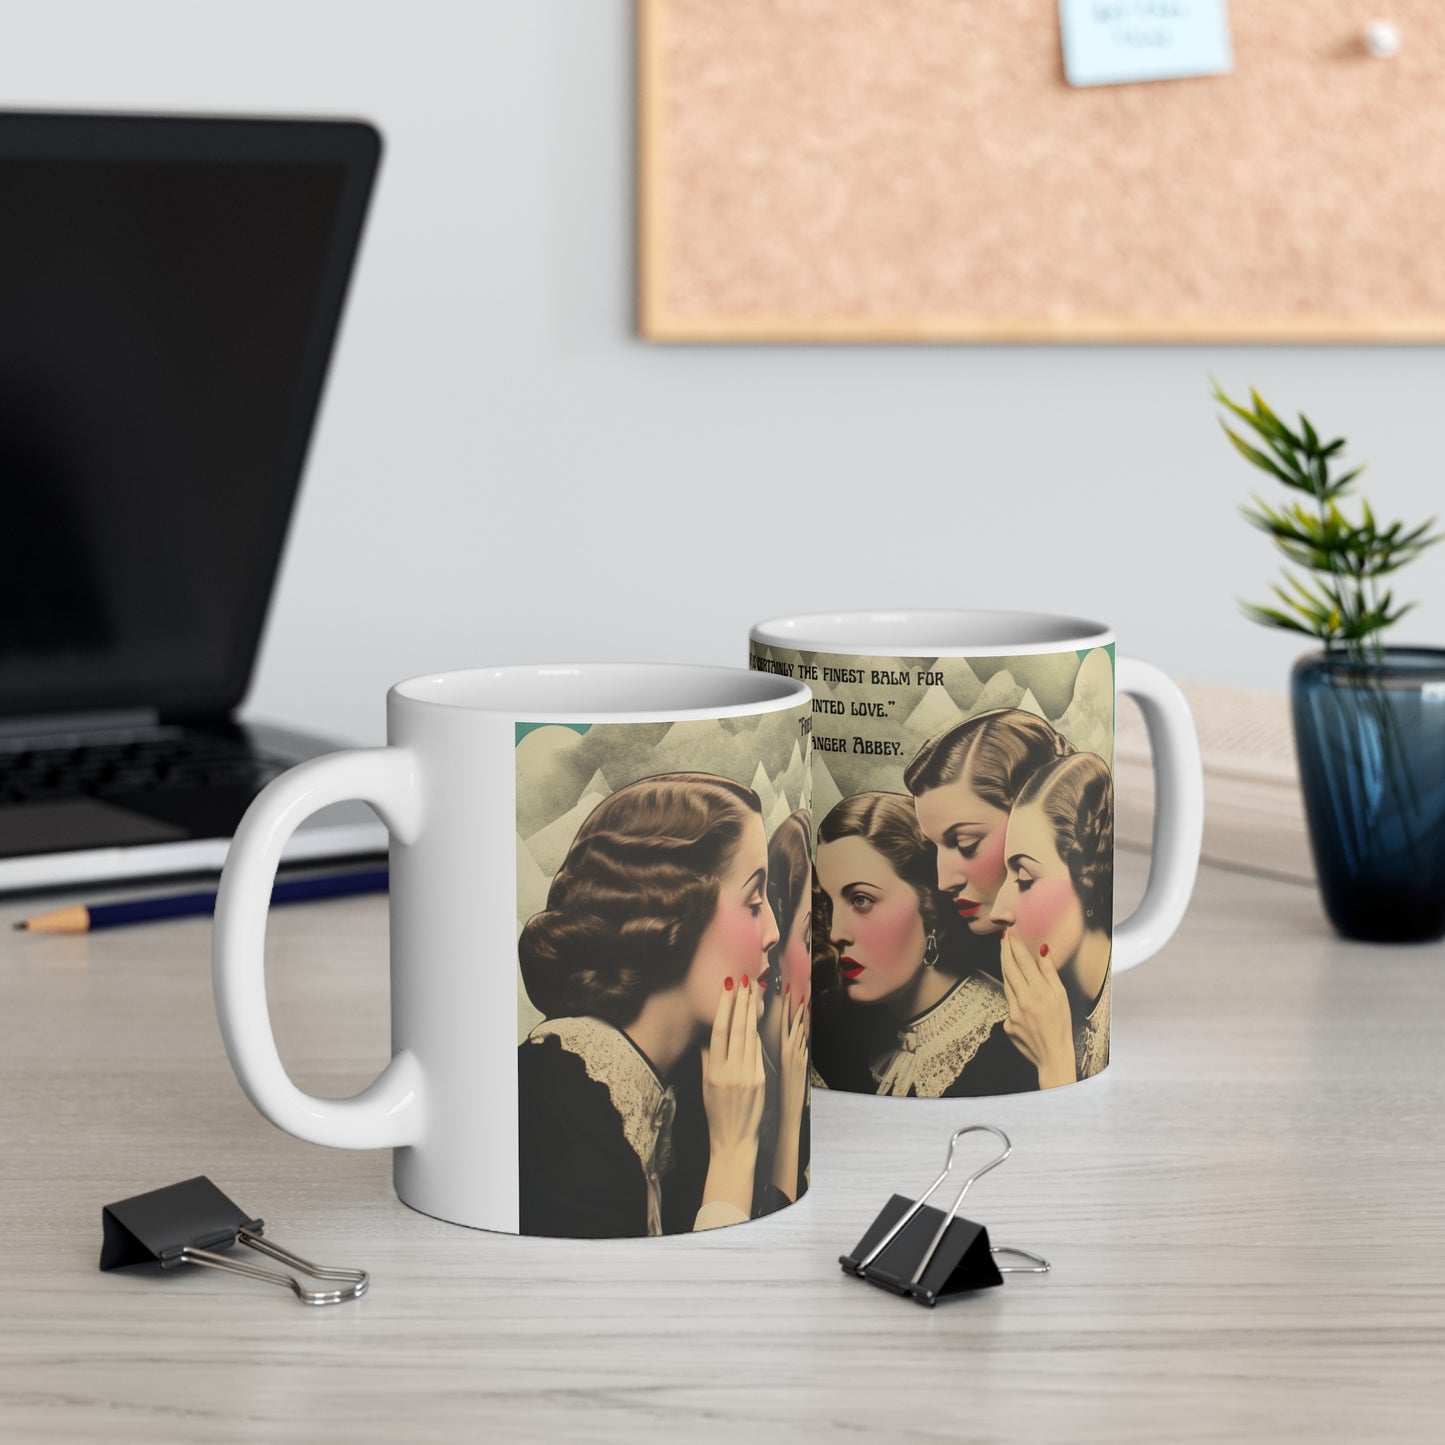 Jane Austen 'Northanger Abbey' Quote Mug - The Ideal Companion for Book Lovers and Beverage Enthusiasts